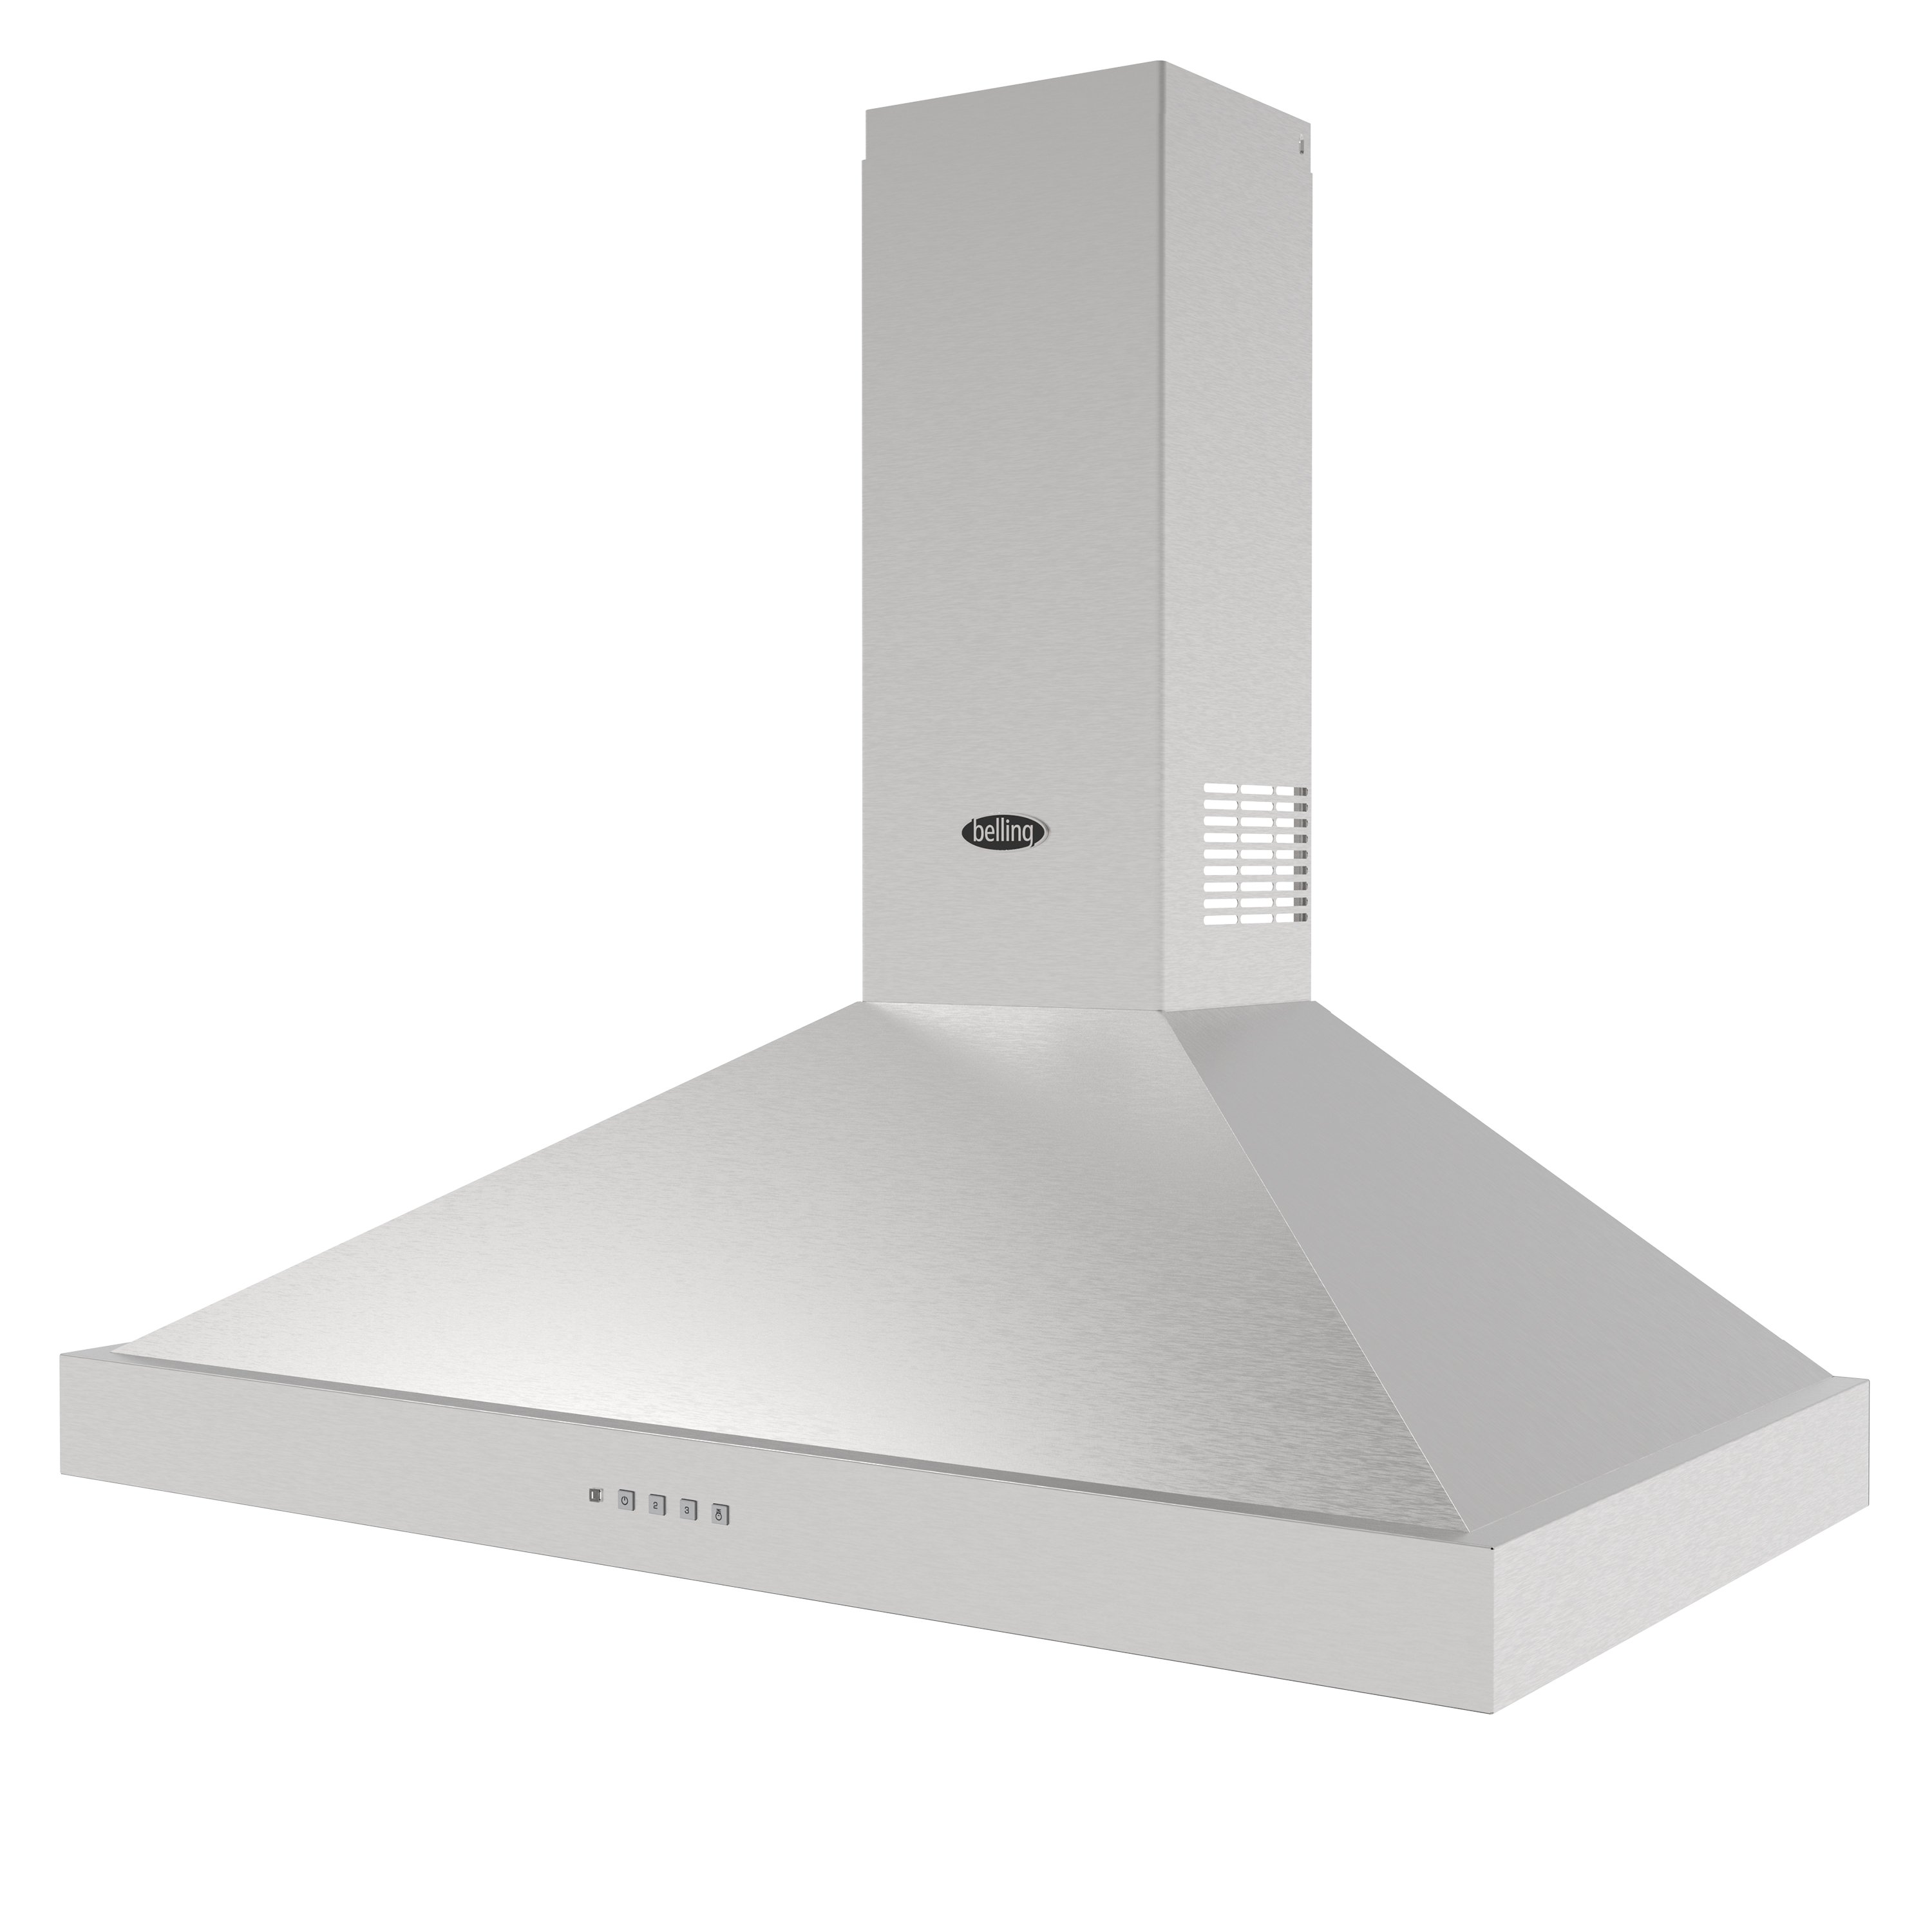 100cm Chimney hood with 3 fan speeds, 2 LED lights, 2 washable grease filters and extendable chimney section